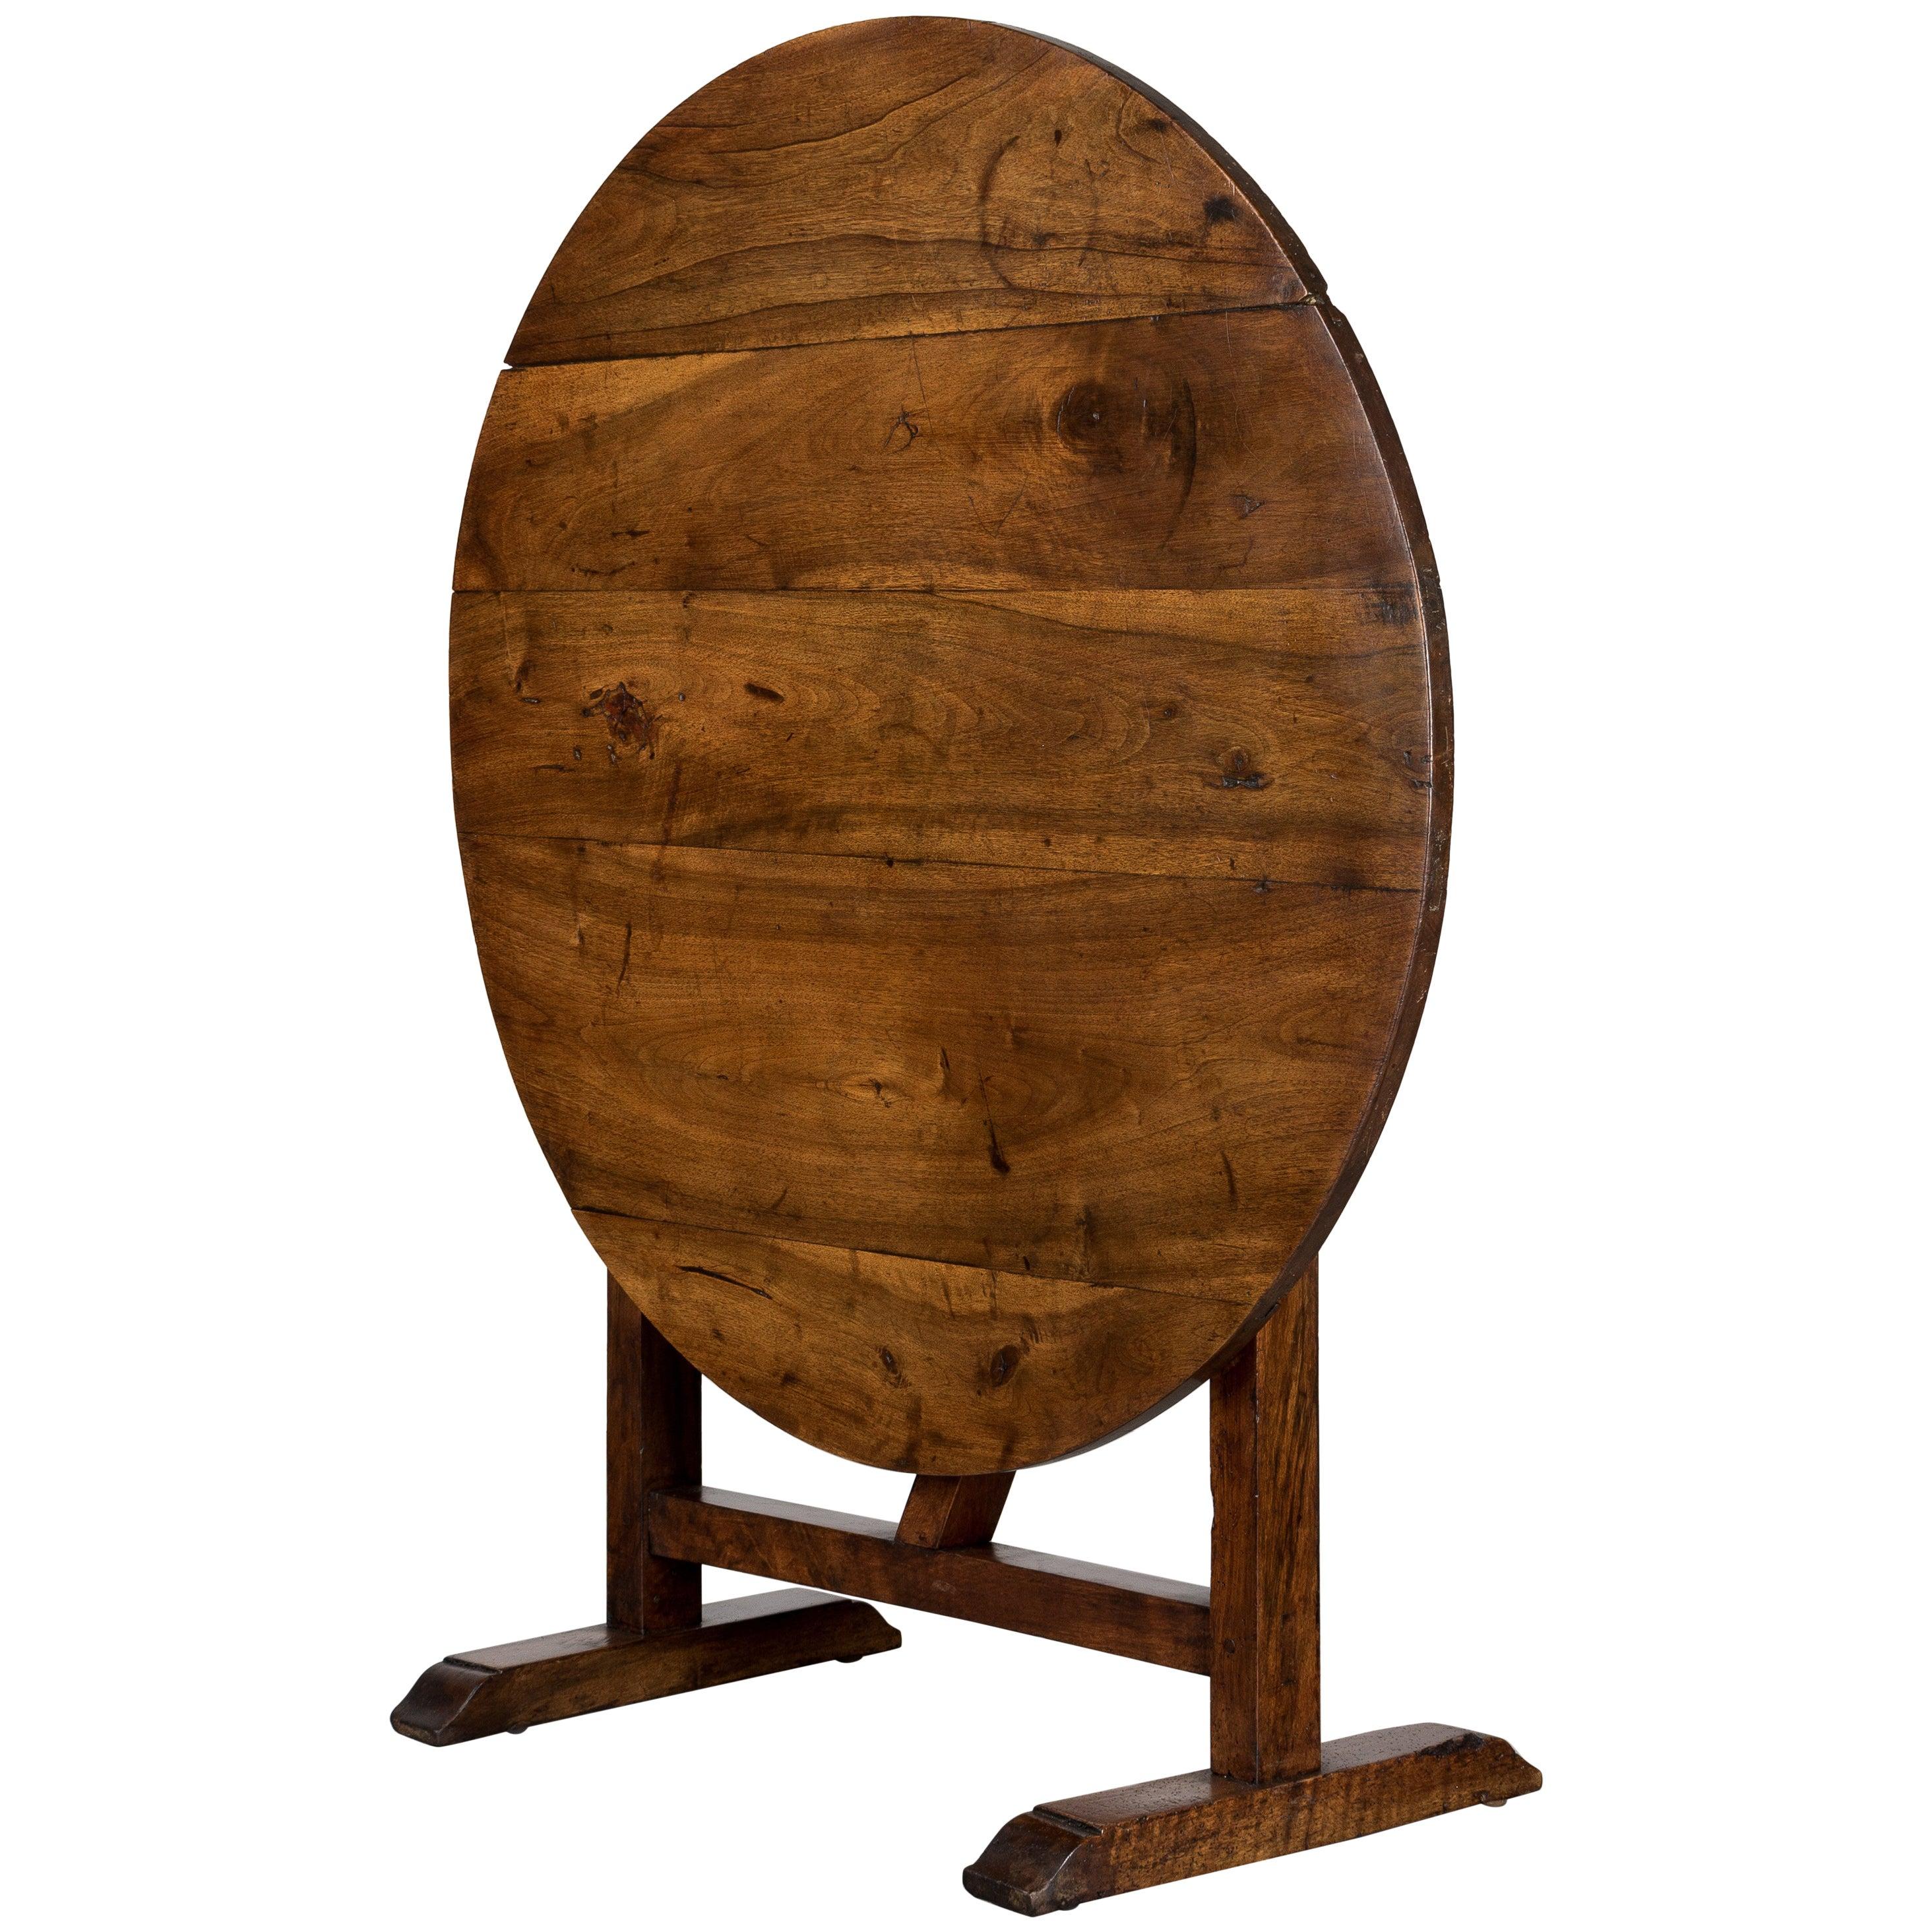 French Wine Tasting Table or Tilt-Top Table